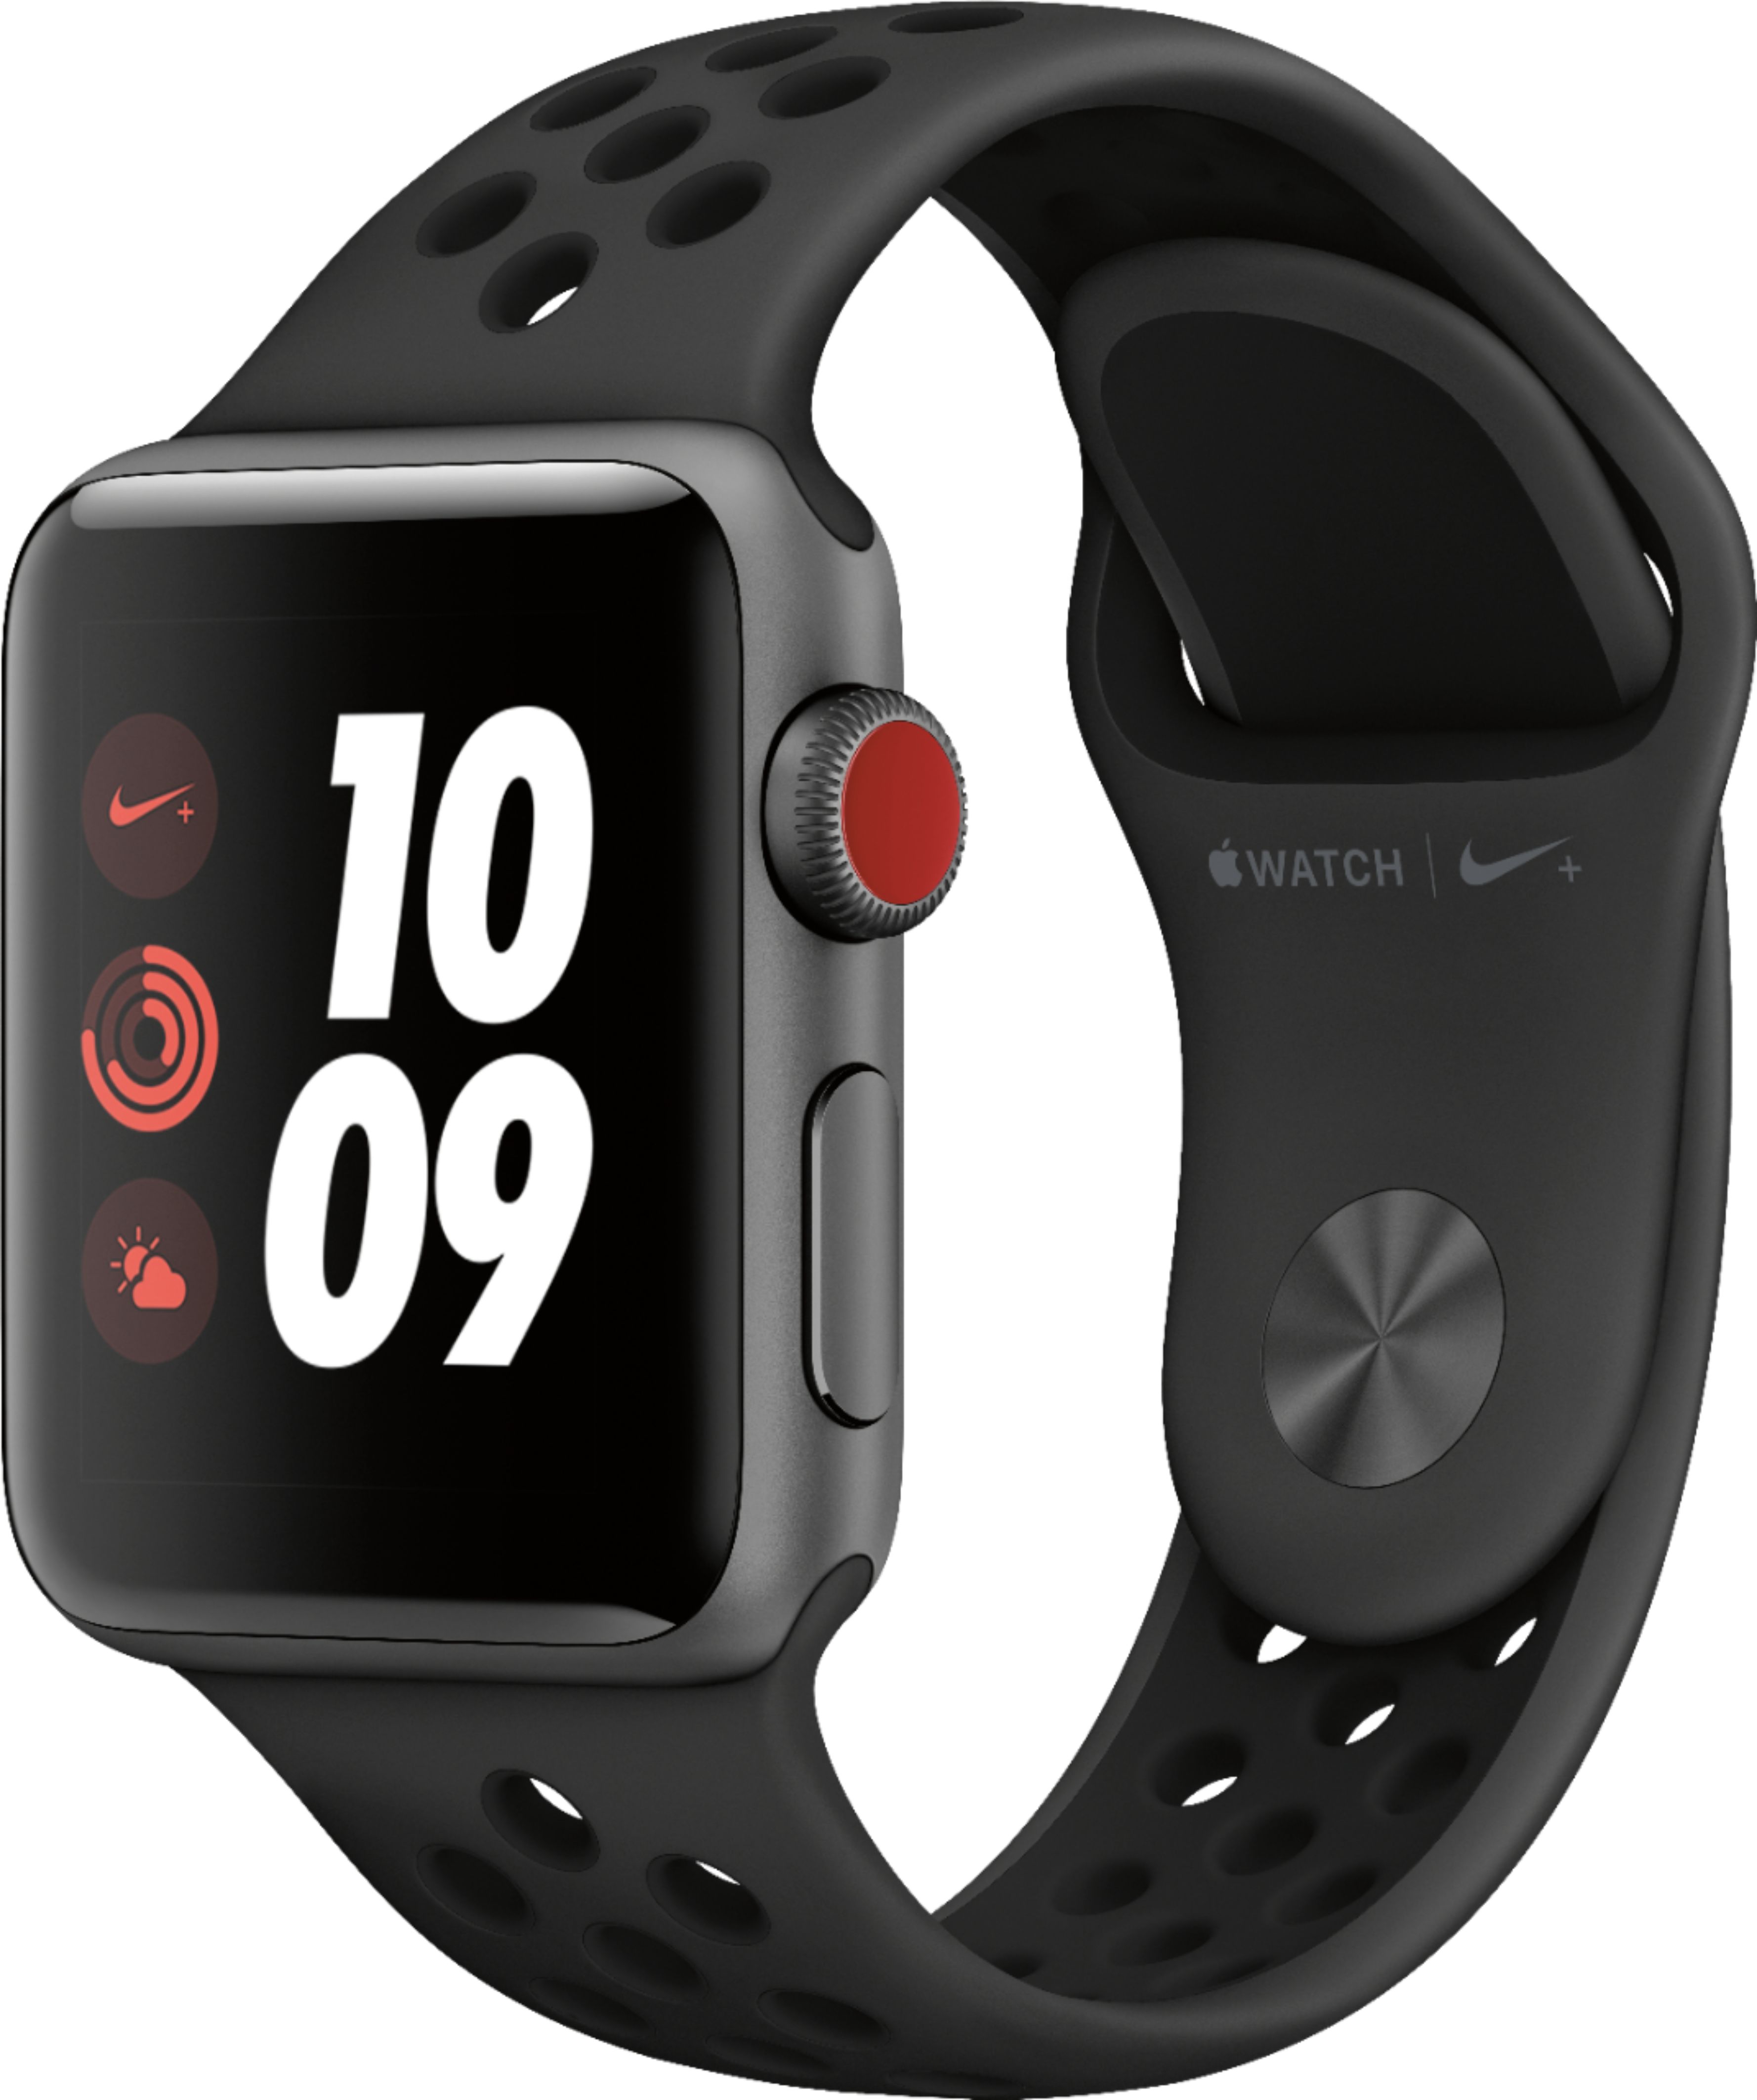 Image of Apple Watch Nike+ Series 3 (GPS + Cellular) 38mm Aluminum Case with Anthracite/Black Nike Sport Band - Space Gray Aluminum